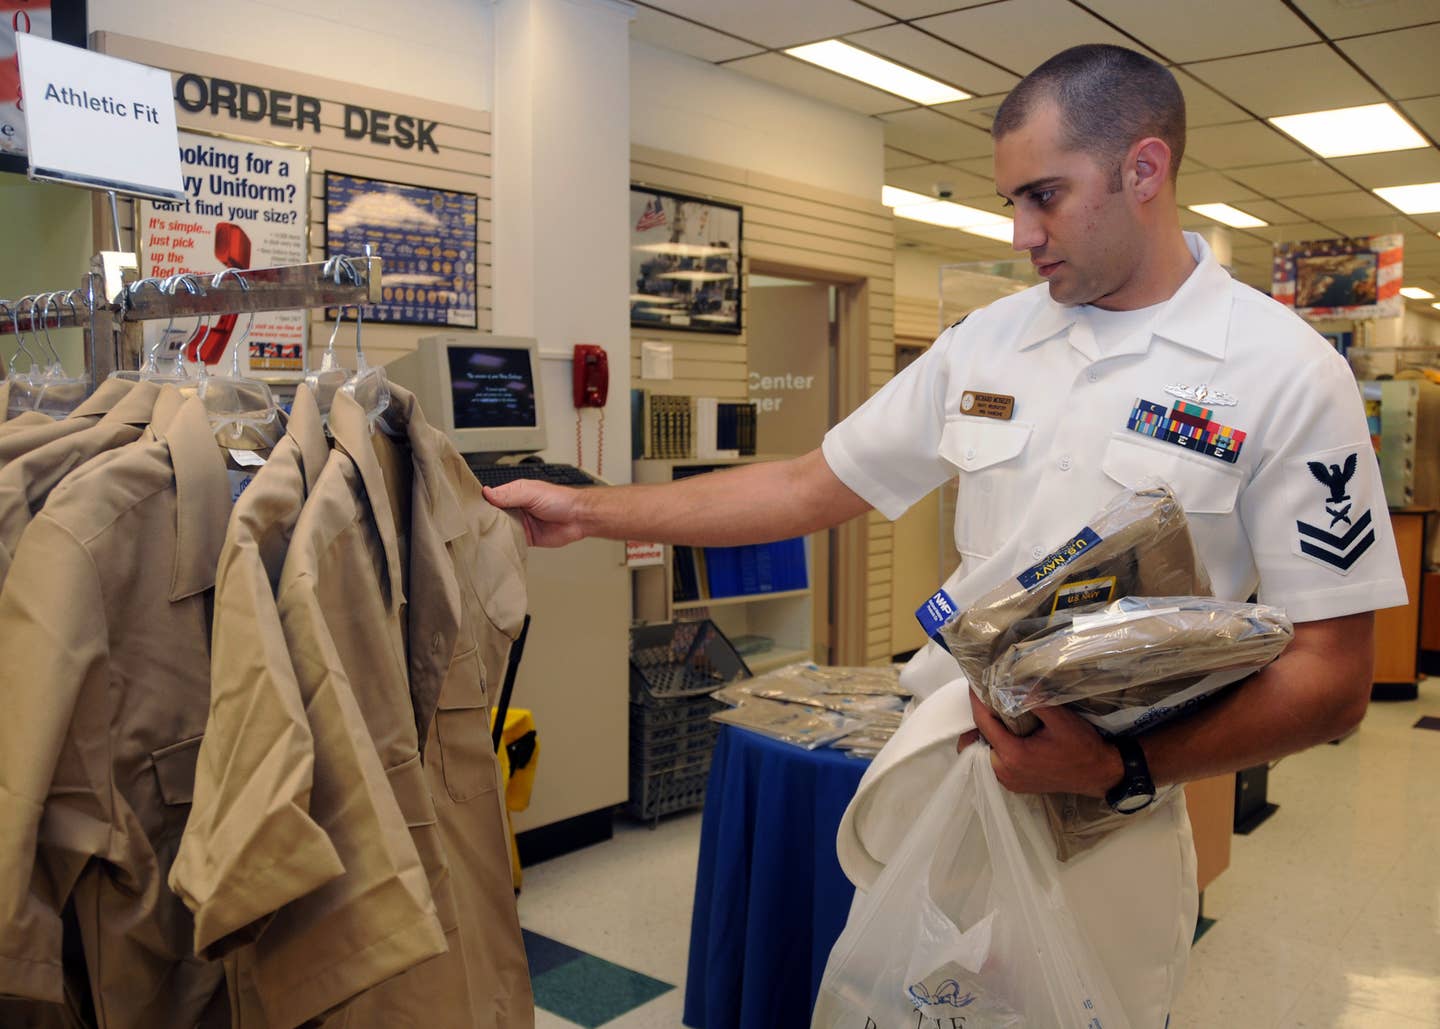 Yeoman Petty Officer 2nd Class Richard Moseley, assigned to Navy Recruiting Station Kaneohe, shops for the new service uniform at the Navy Exchange Uniform Shop aboard Naval Station Pearl Harbor.